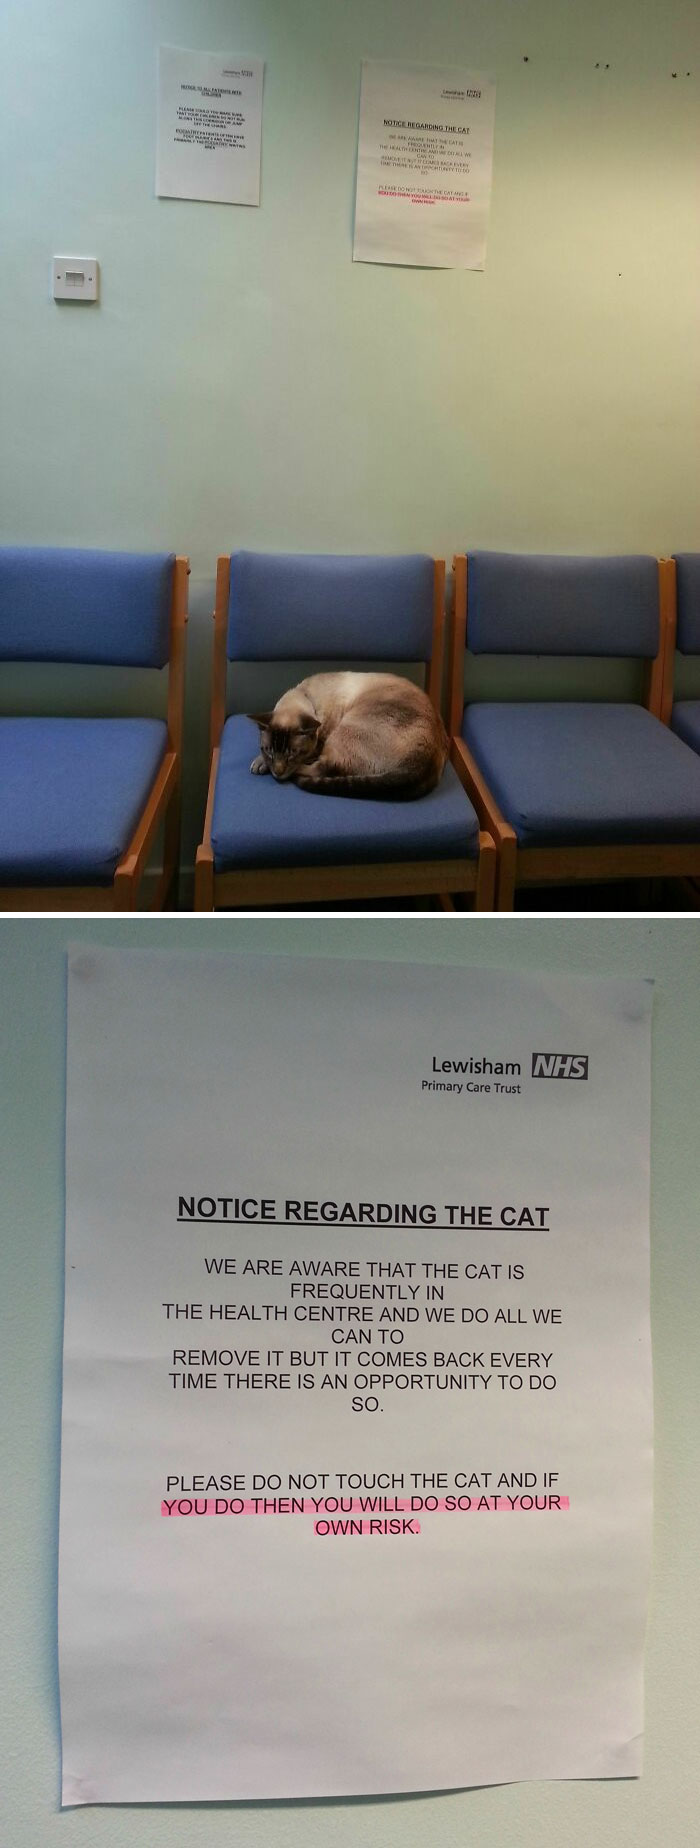 I Was Surprised To See A Cat At The Doctor's Waiting Room. Then I Noticed The Sign